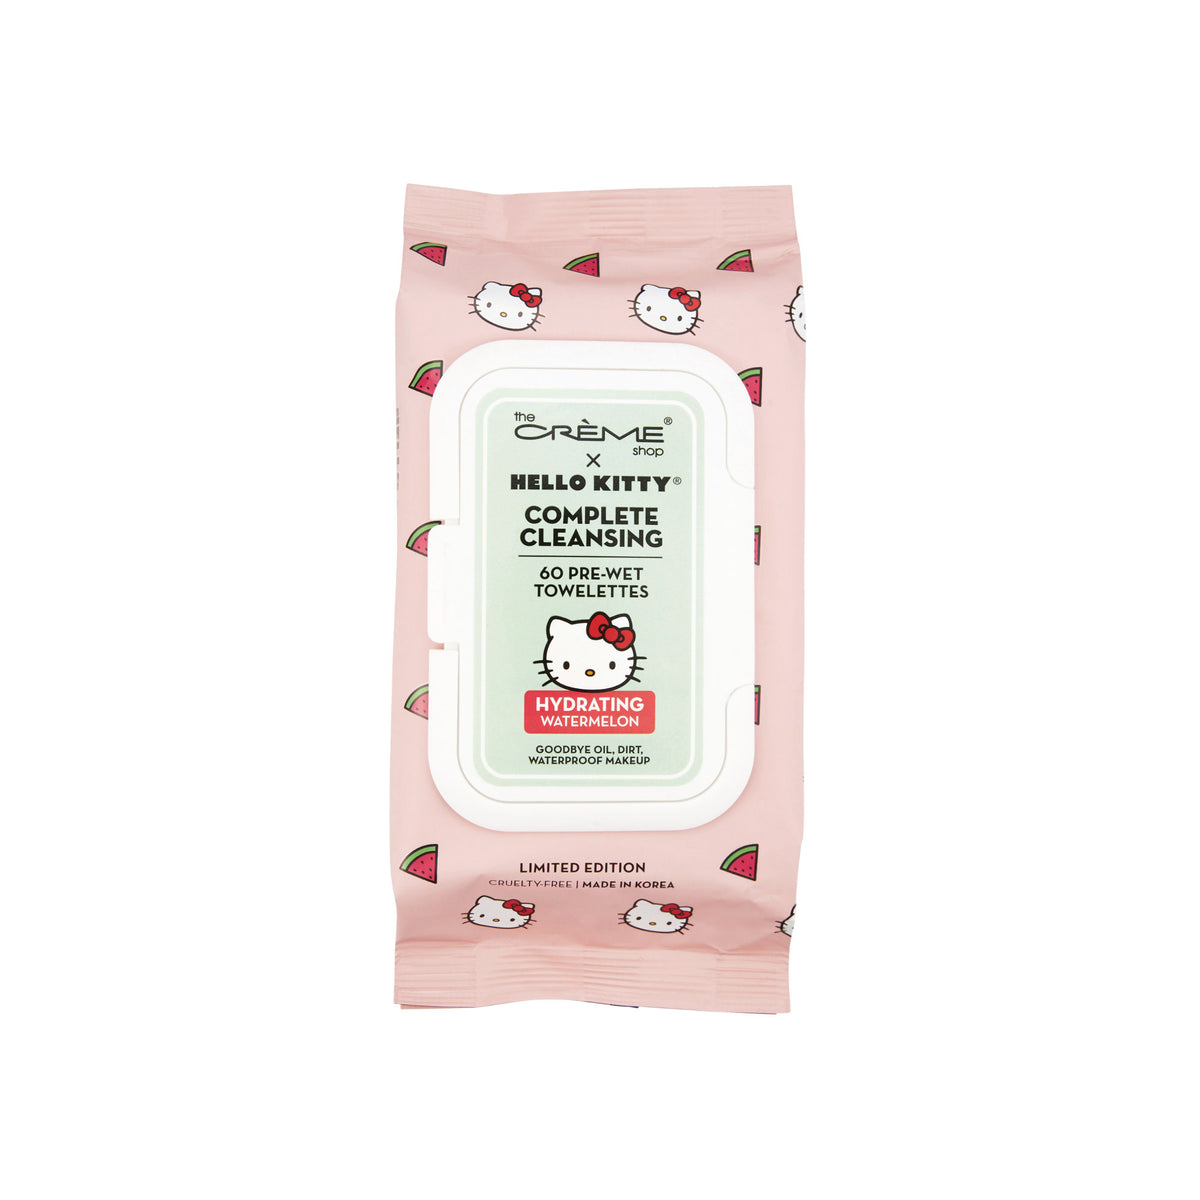 Hello Kitty x The Crème Shop Complete Cleansing (Hydrating Watermelon) Beauty The Crème Shop   